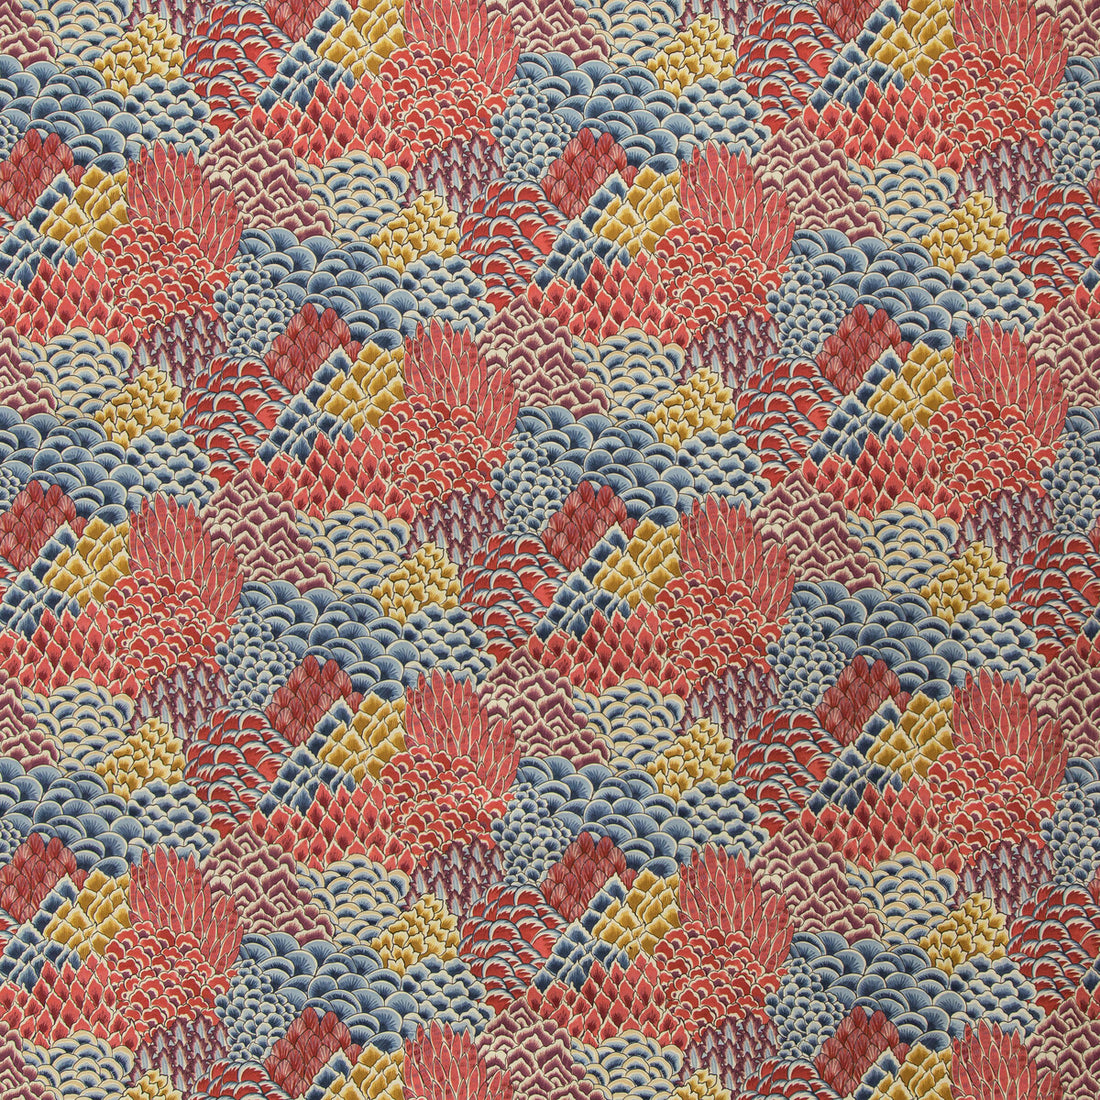 Katibi Print fabric in multi color - pattern 8020104.195.0 - by Brunschwig &amp; Fils in the Grand Bazaar collection